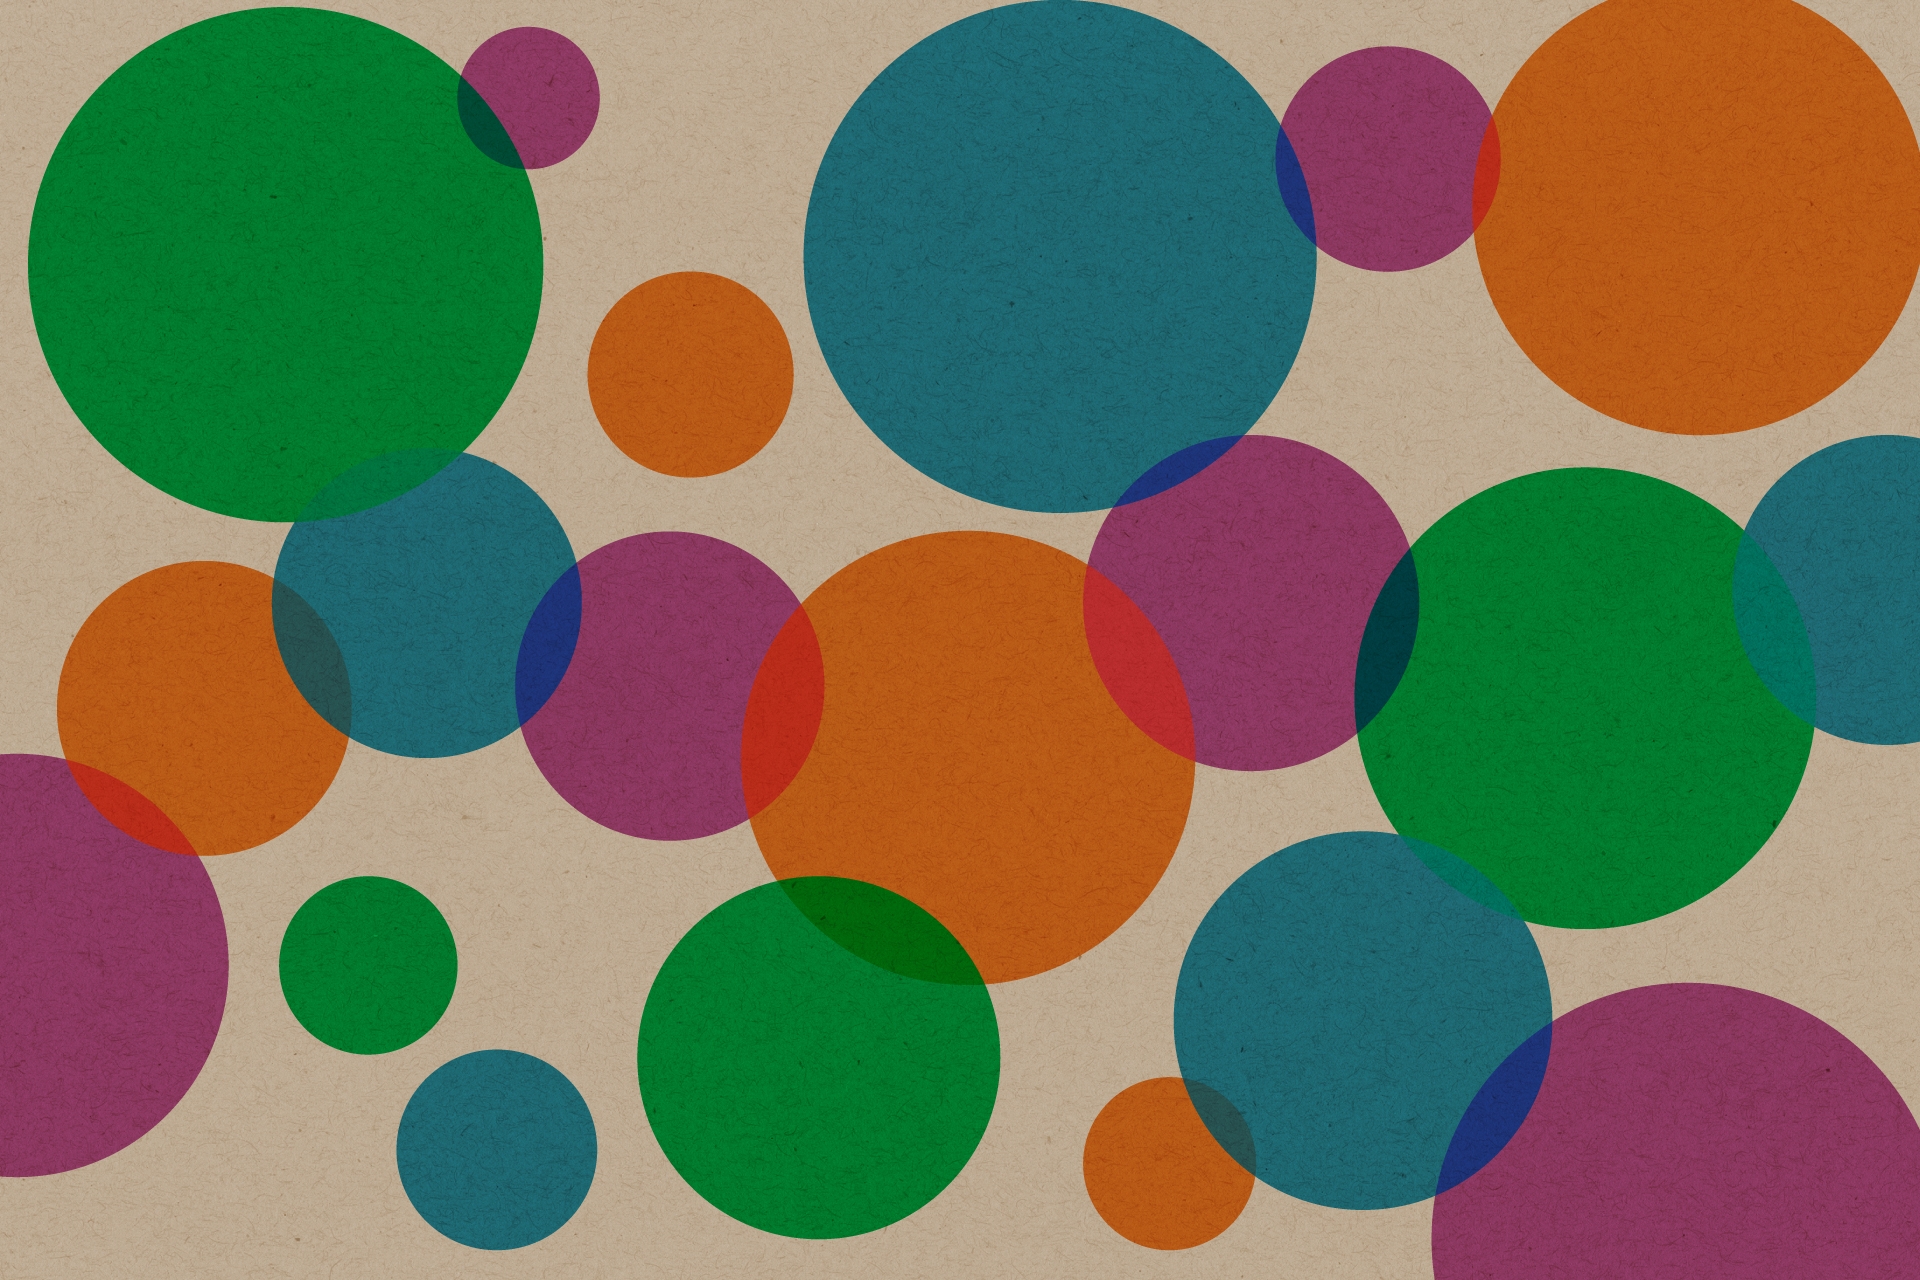 Green, blue, orange and purple circles of various sizes scattered over a brown background.